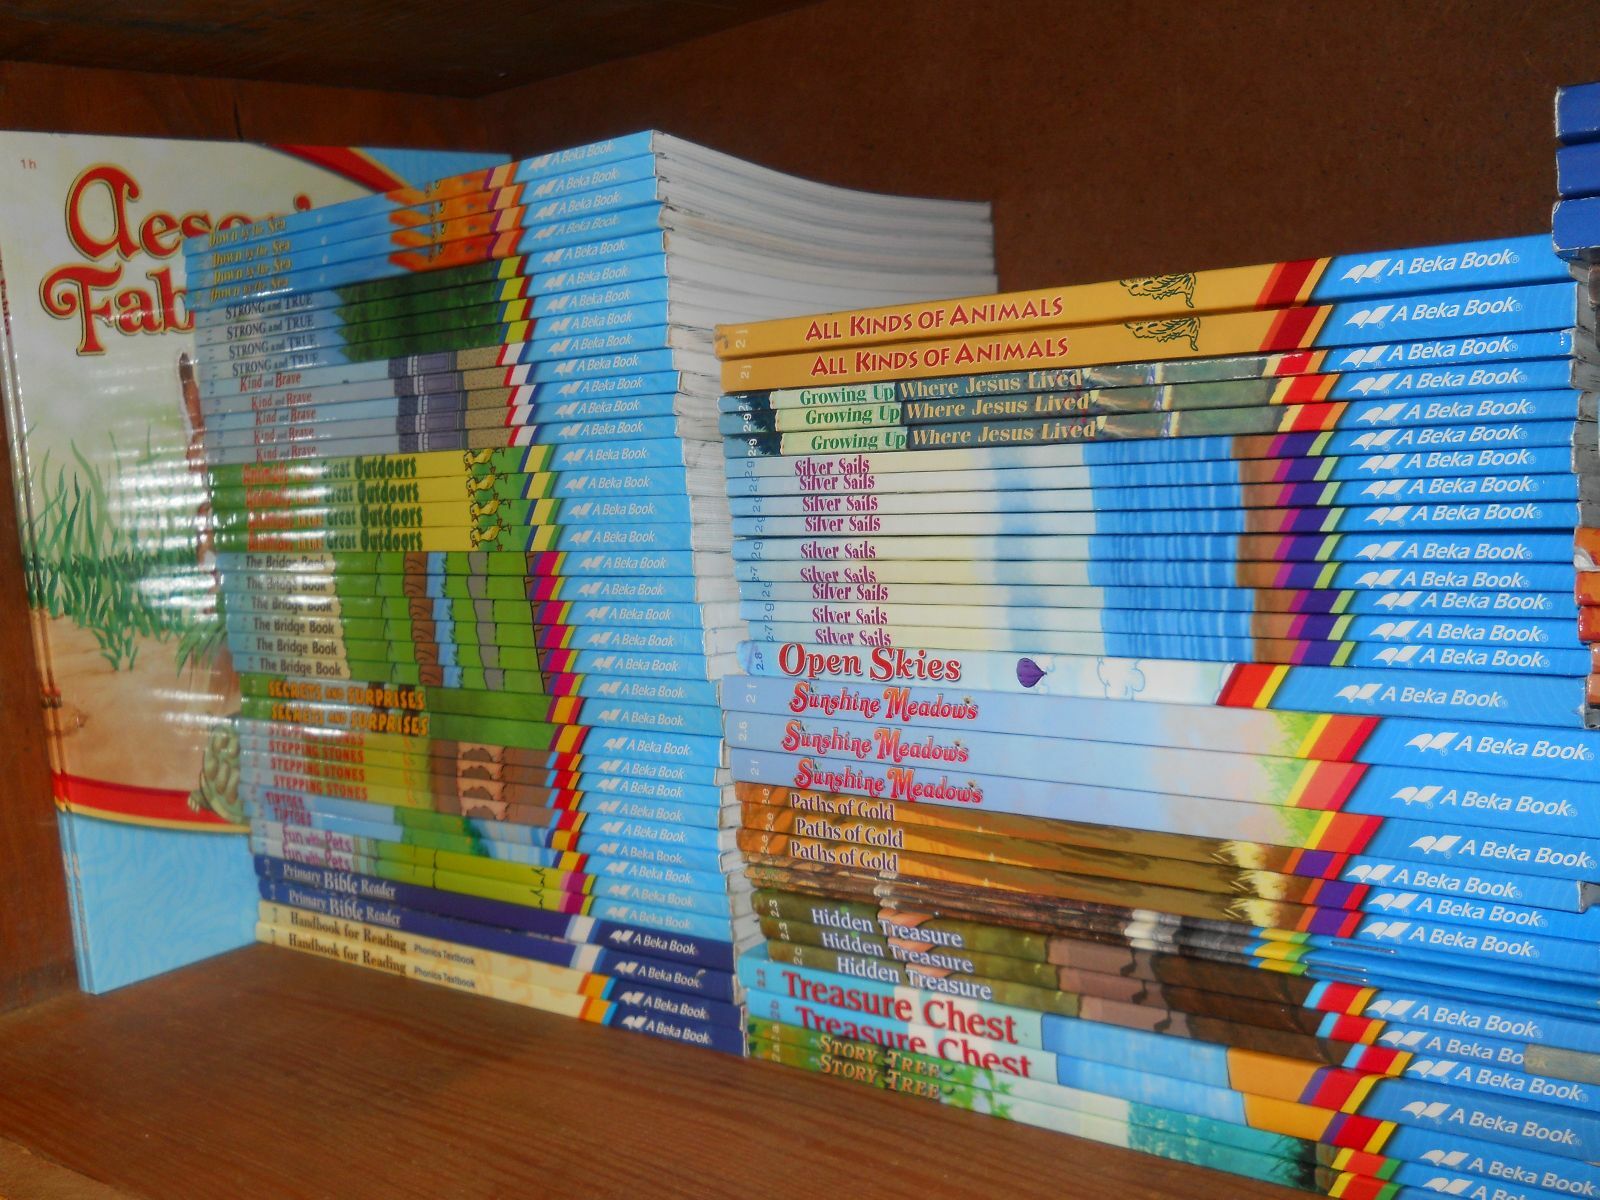 Build You Own" Book Lot Abeka Readers-$5.00 Ea.+ship Disc. On 2+ Some Current